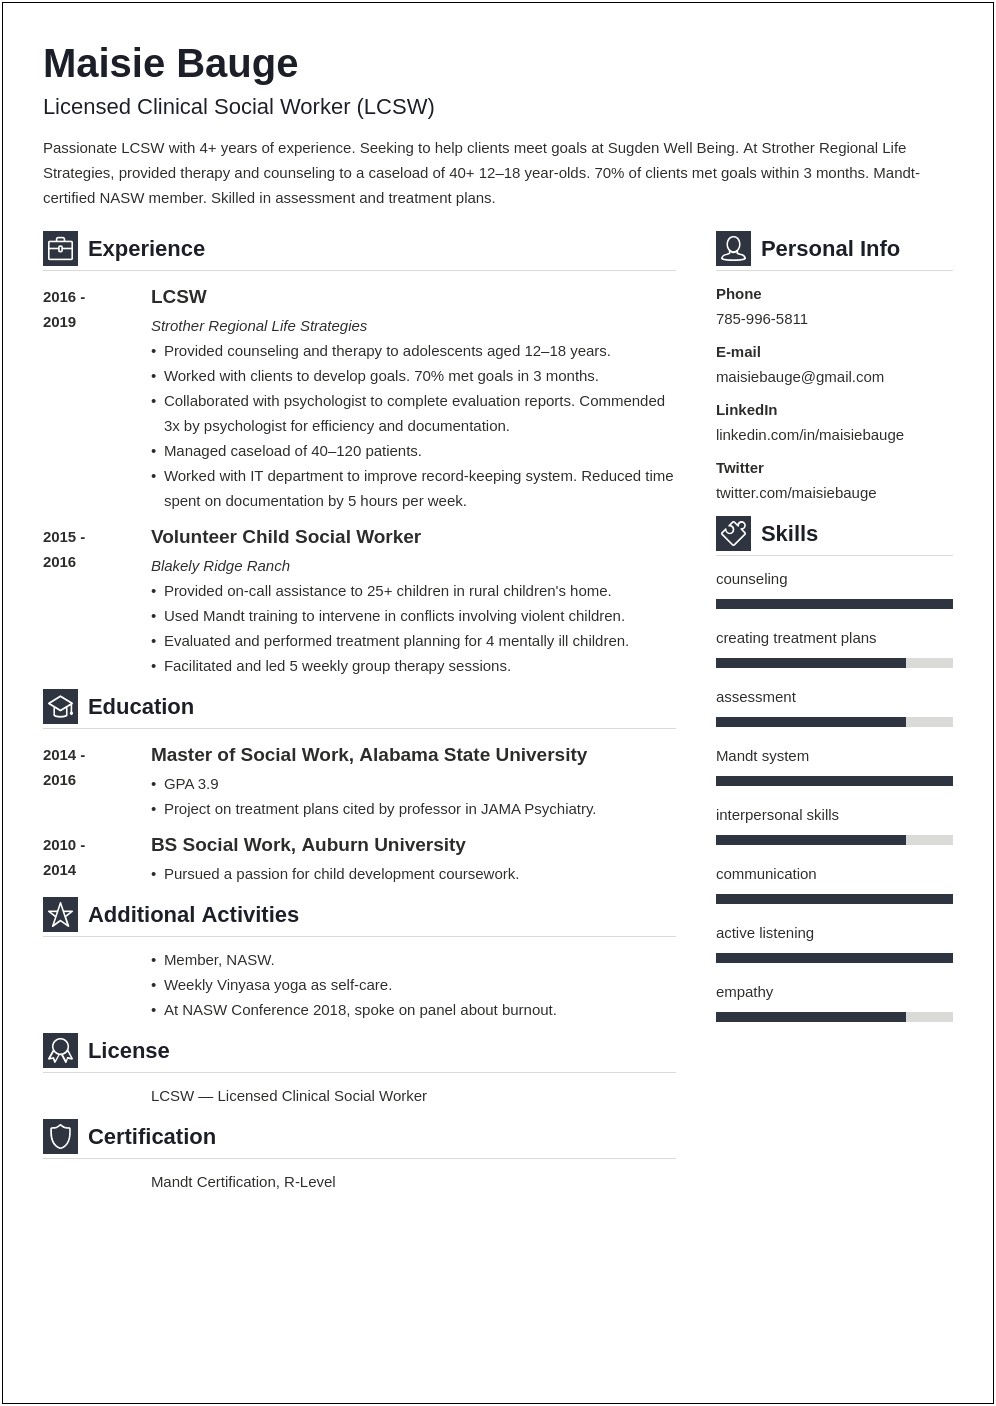 Resume Example Including Core Competancies For Social Work